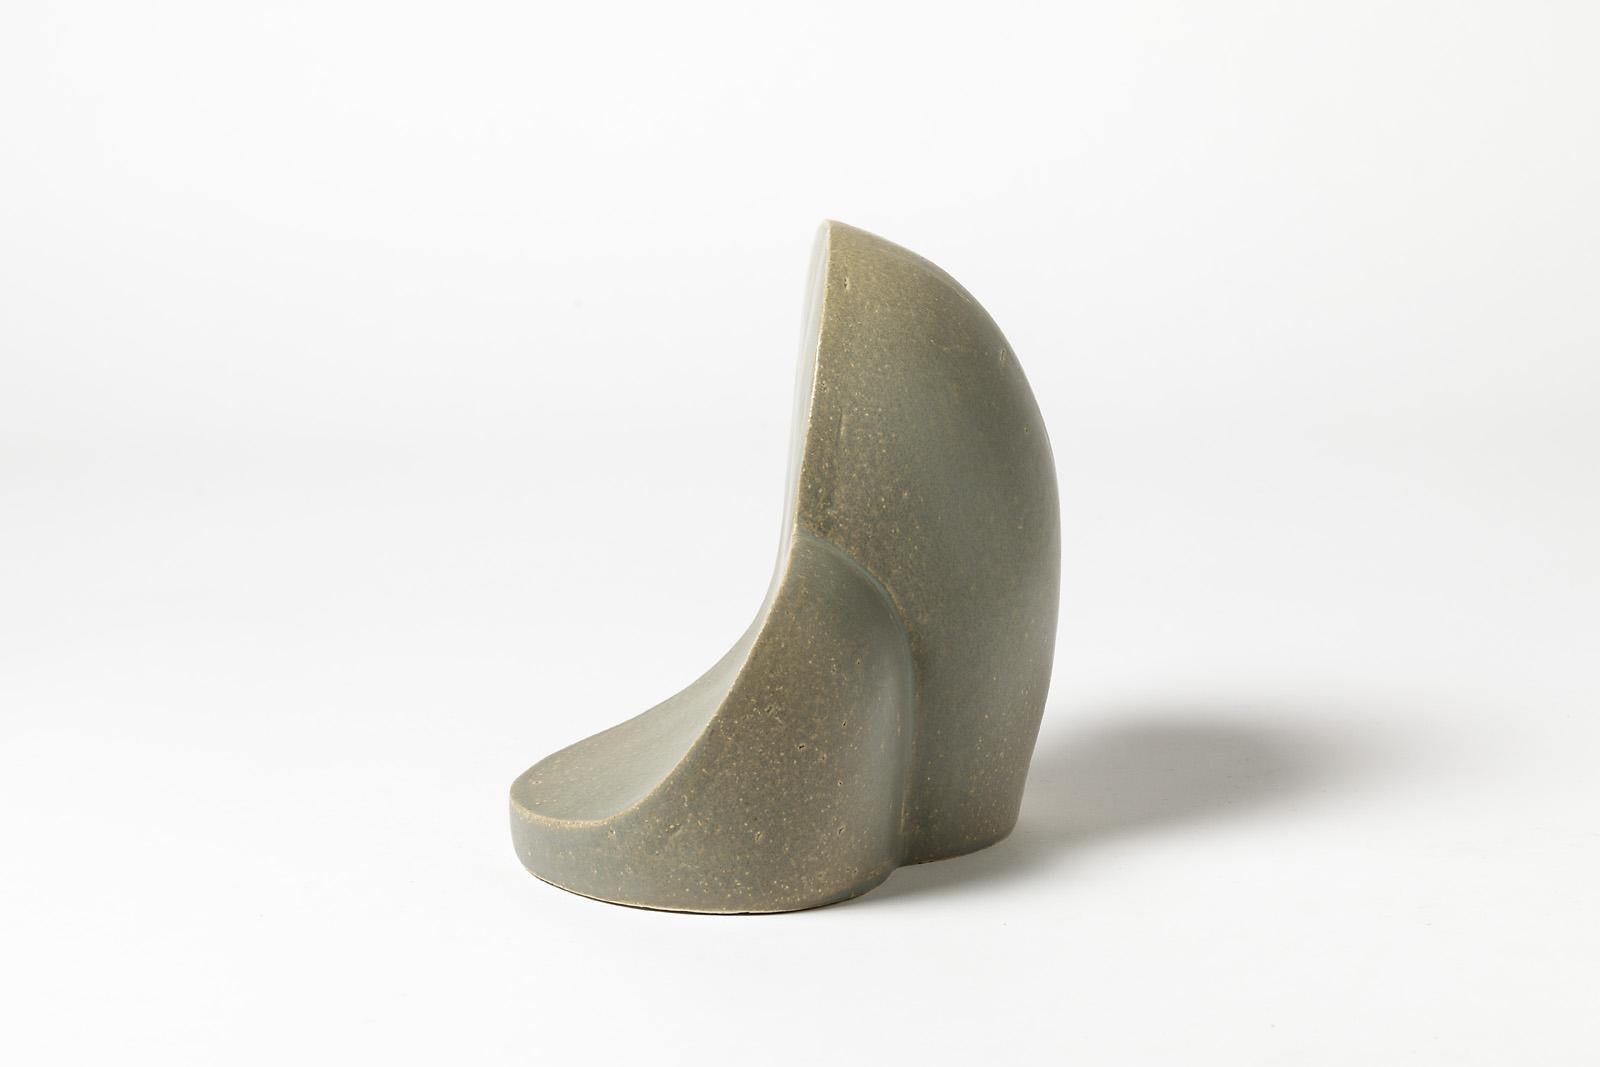 French Contemporary and Decorative Ceramic Sculpture by Julia Huteau Abstract Form